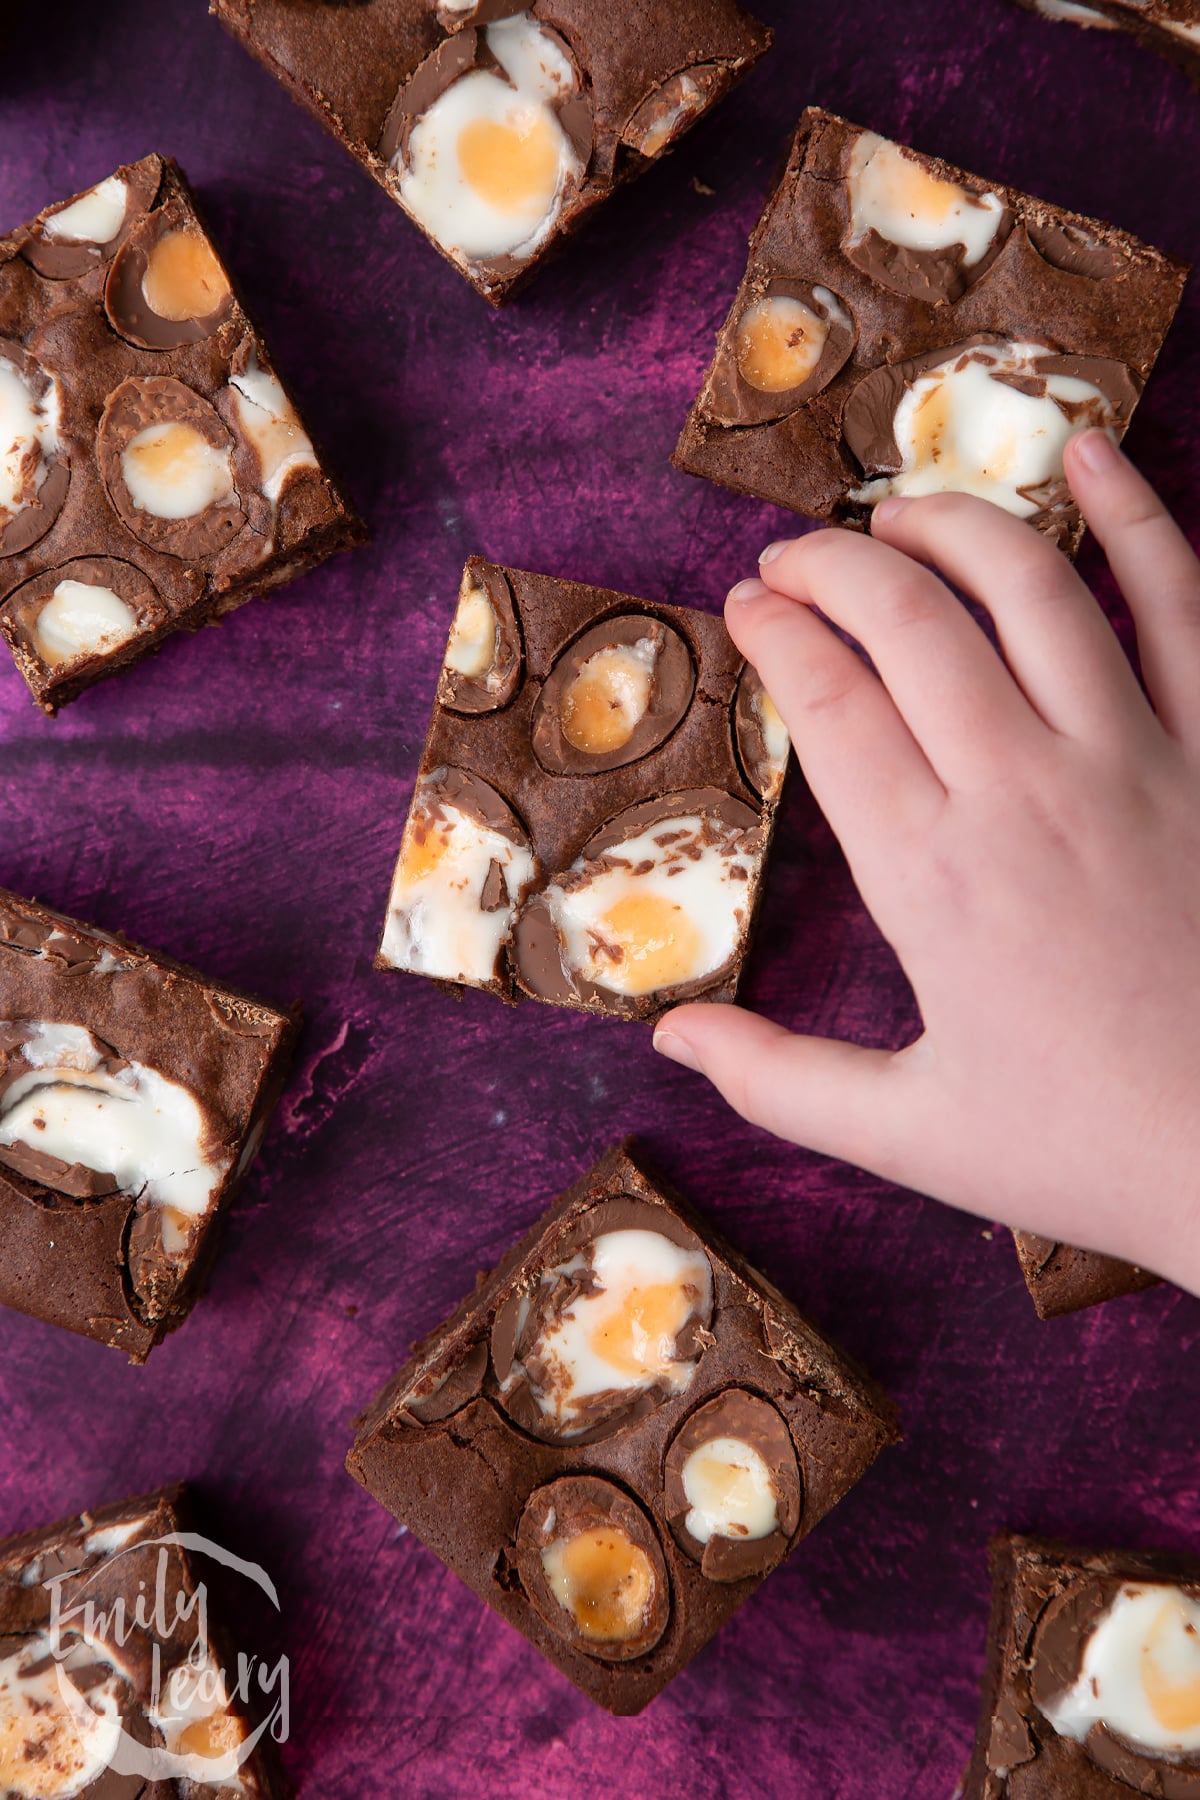 Hand reaching in to grab a finished Cadbury Creme Egg brownie.